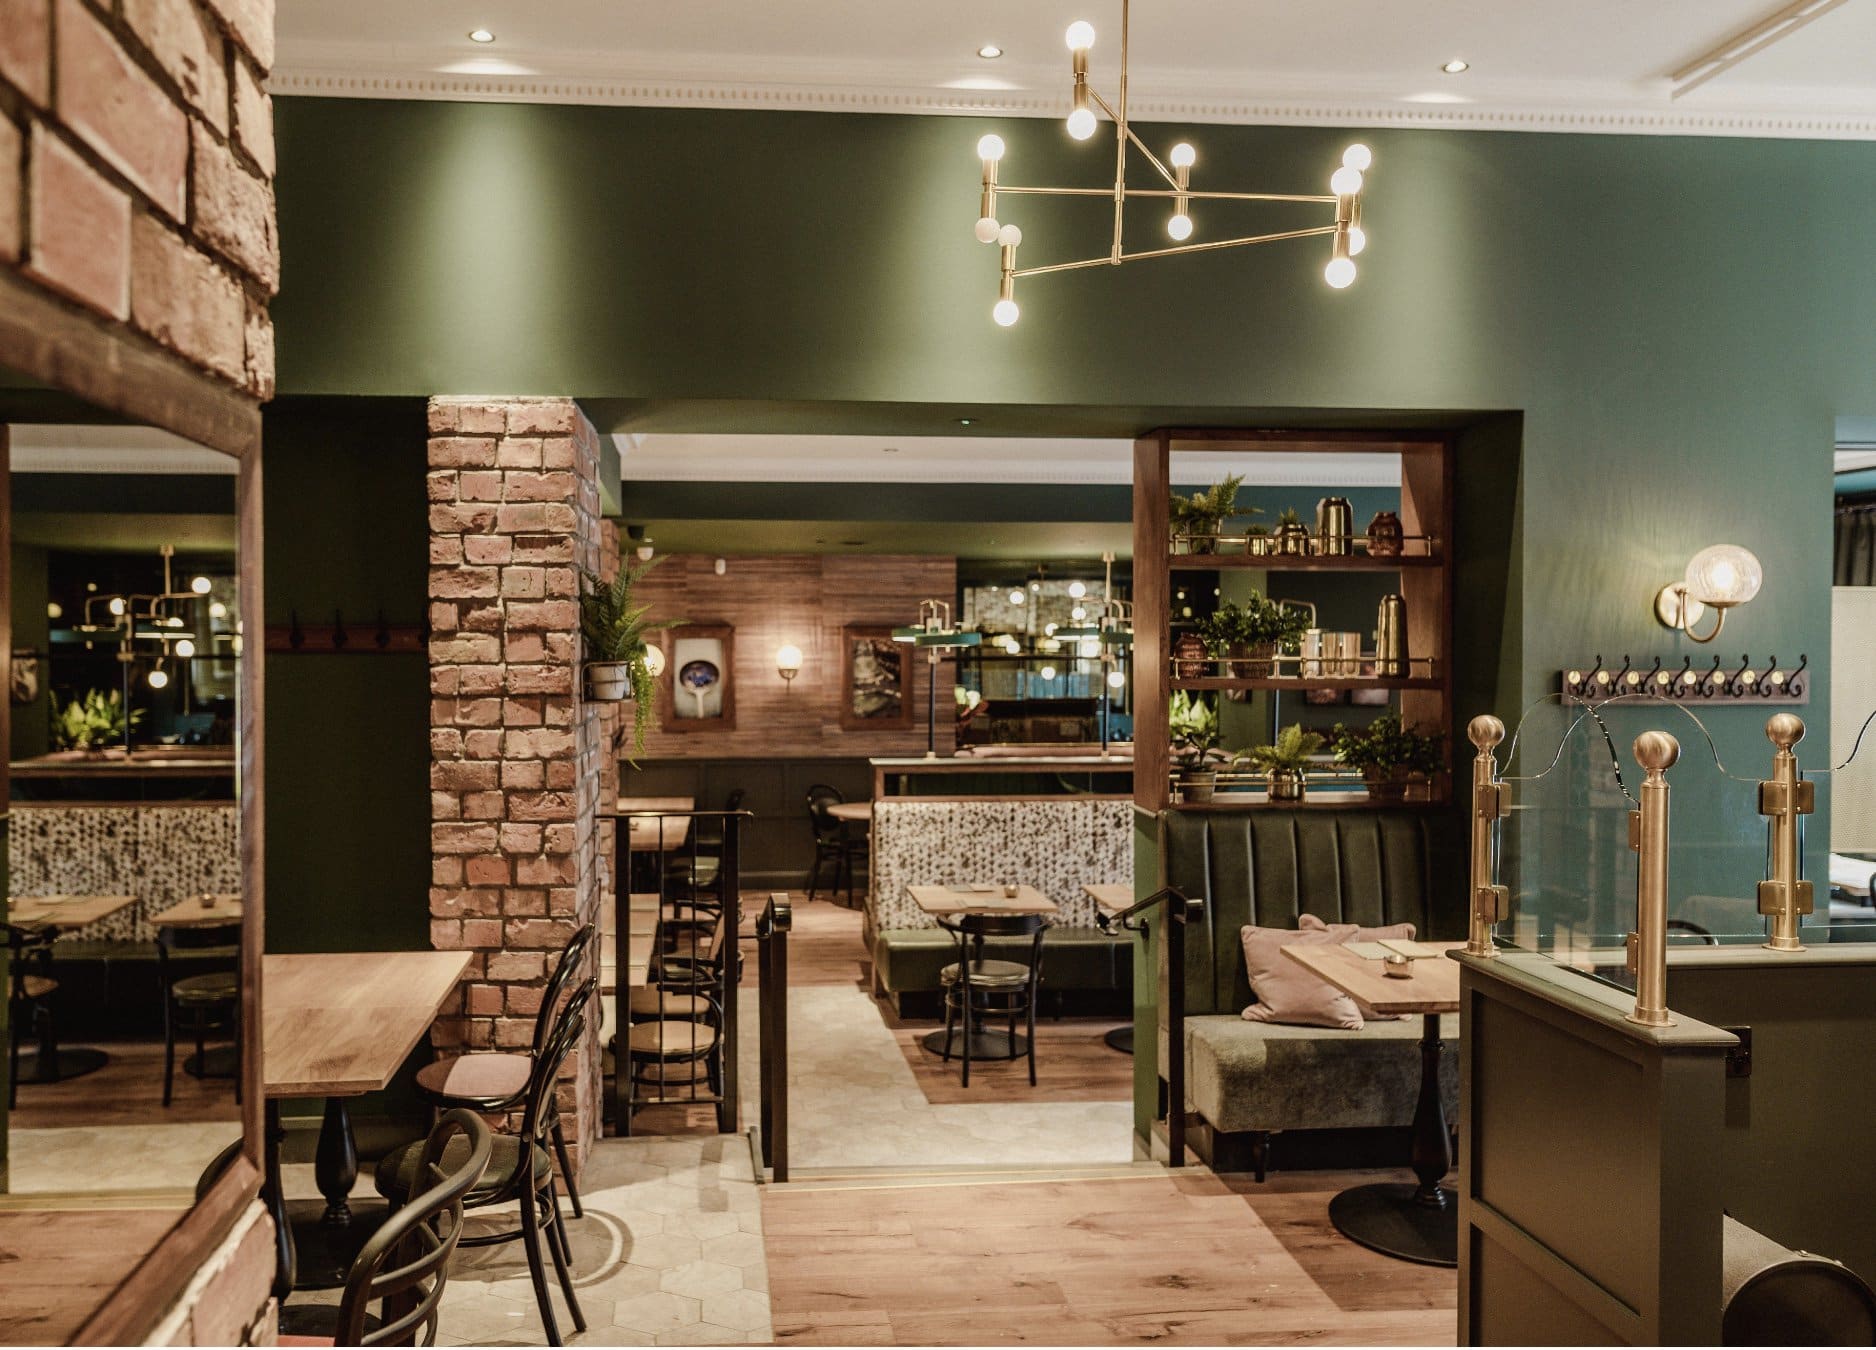 KORA by Tom Kitchin to expand and move to seven day operation